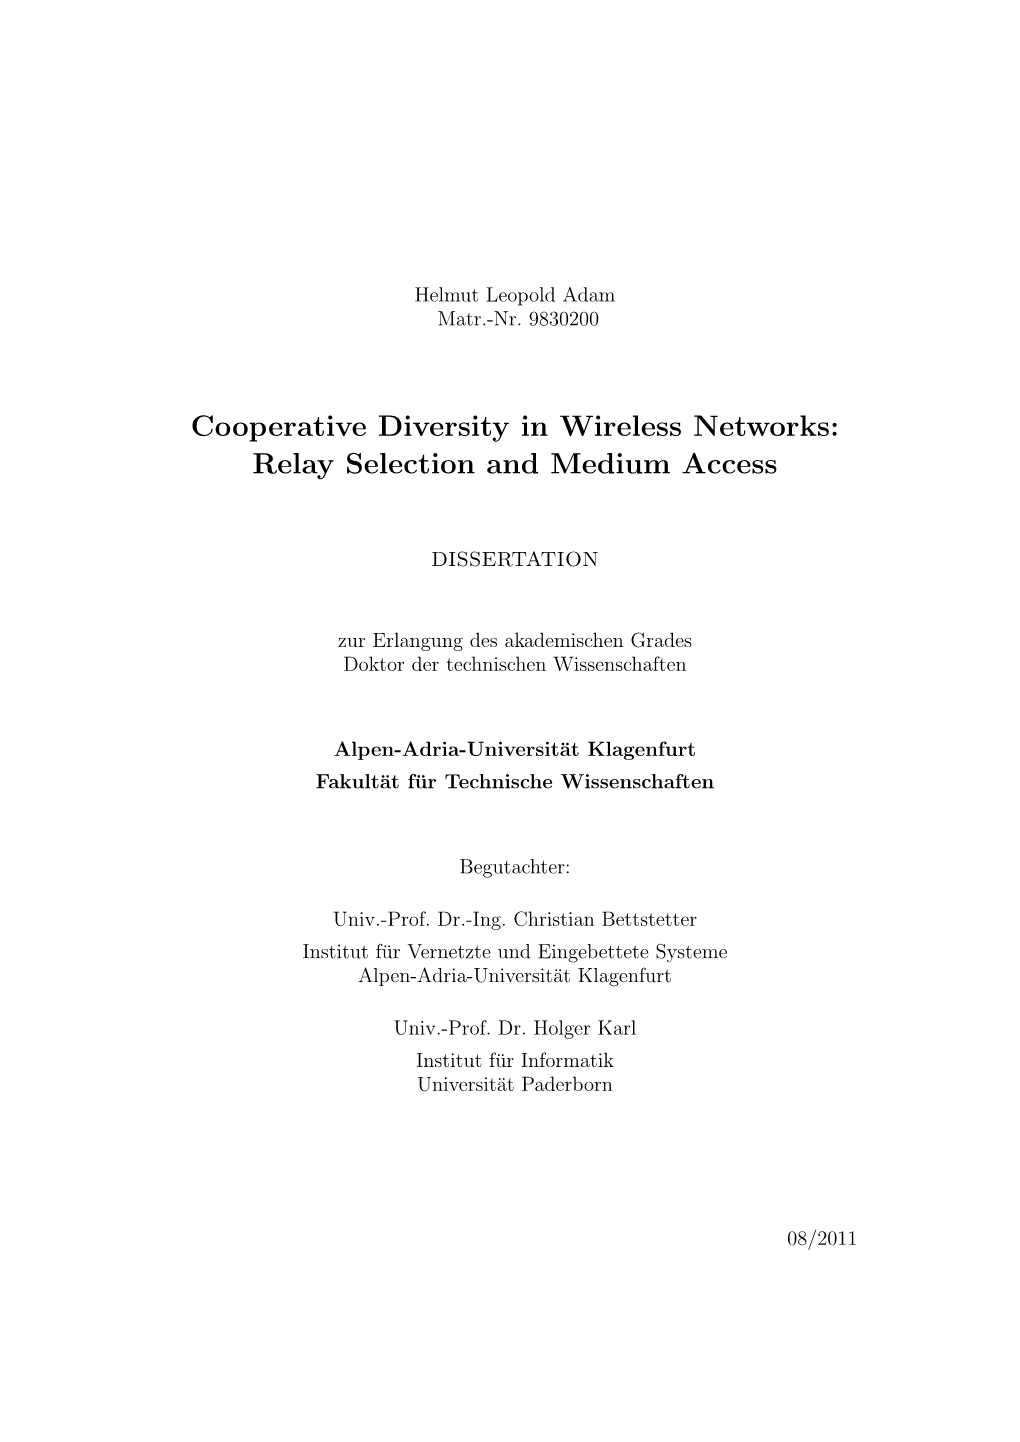 Cooperative Diversity in Wireless Networks: Relay Selection and Medium Access